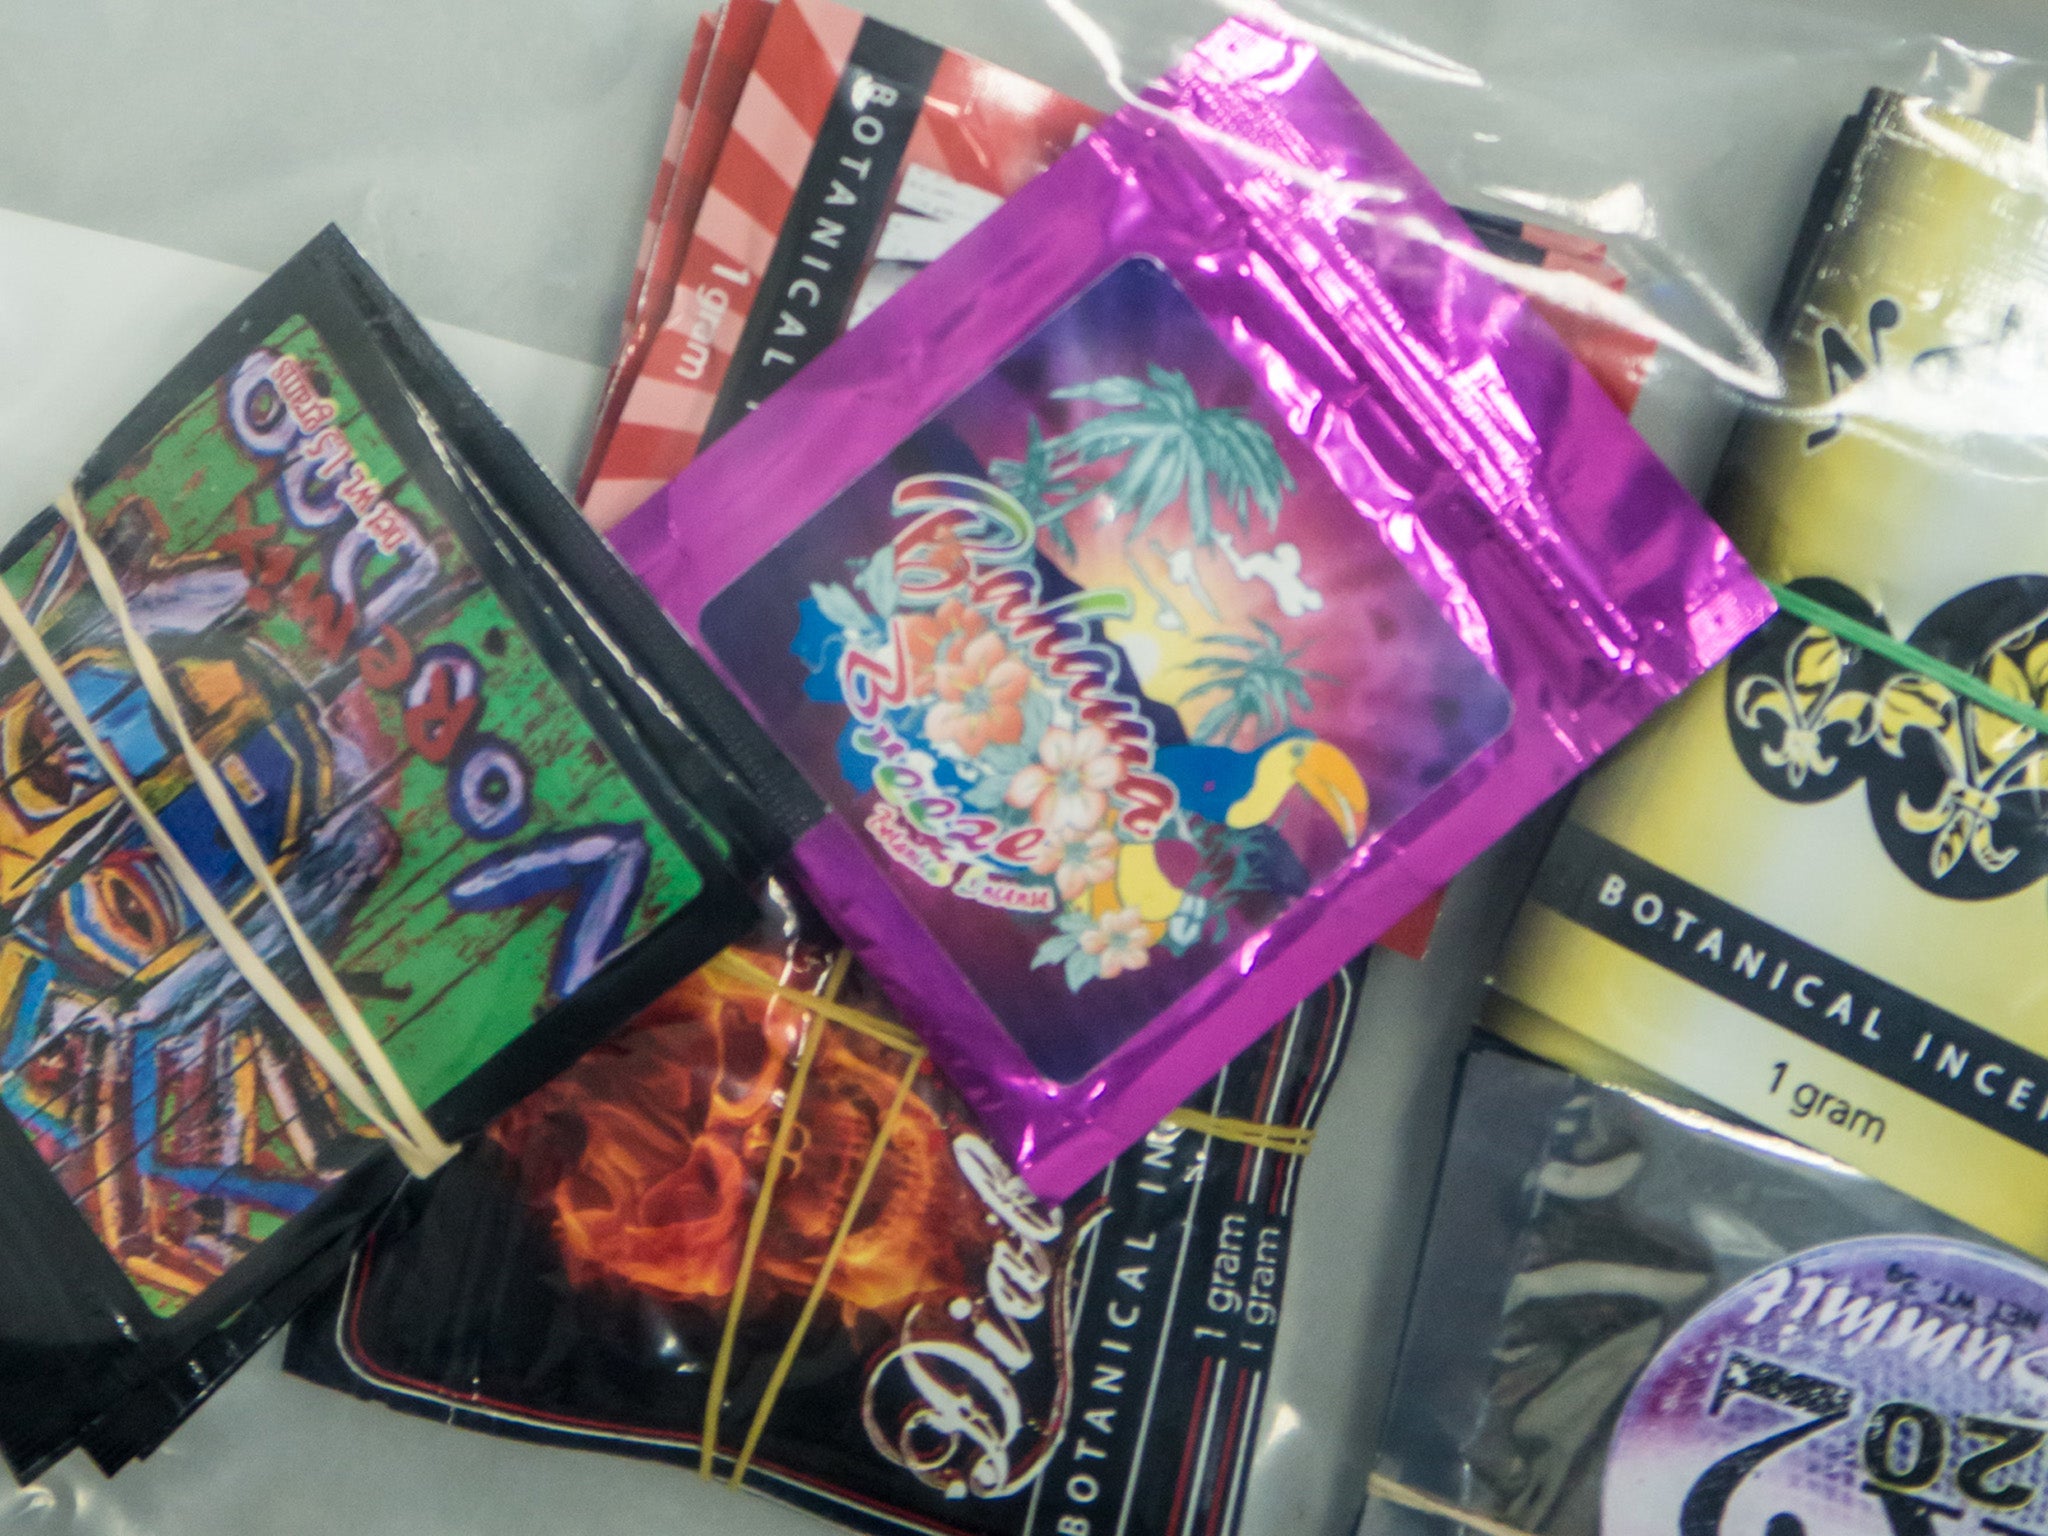 Concerns have been raised that the legal highs ban will be unenforceable